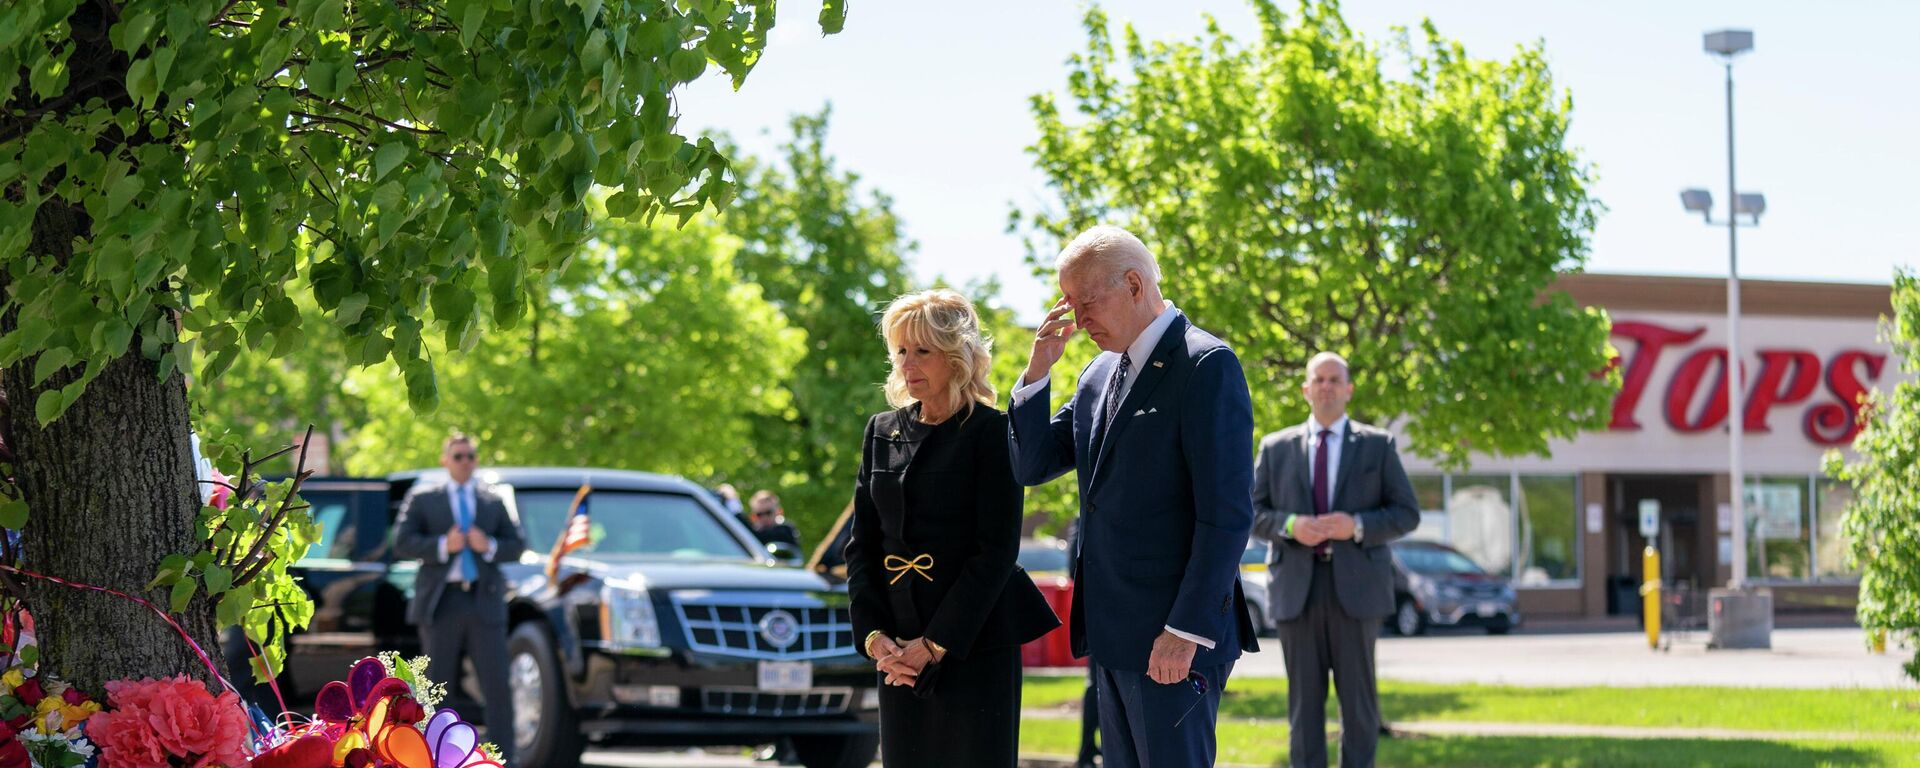 President Joe Biden and first lady Jill Biden visit the scene of a shooting at a supermarket to pay respects and speak to families of the victims of Saturday's shooting in Buffalo, N.Y., Tuesday, May 17, 2022.  - Sputnik International, 1920, 17.05.2022